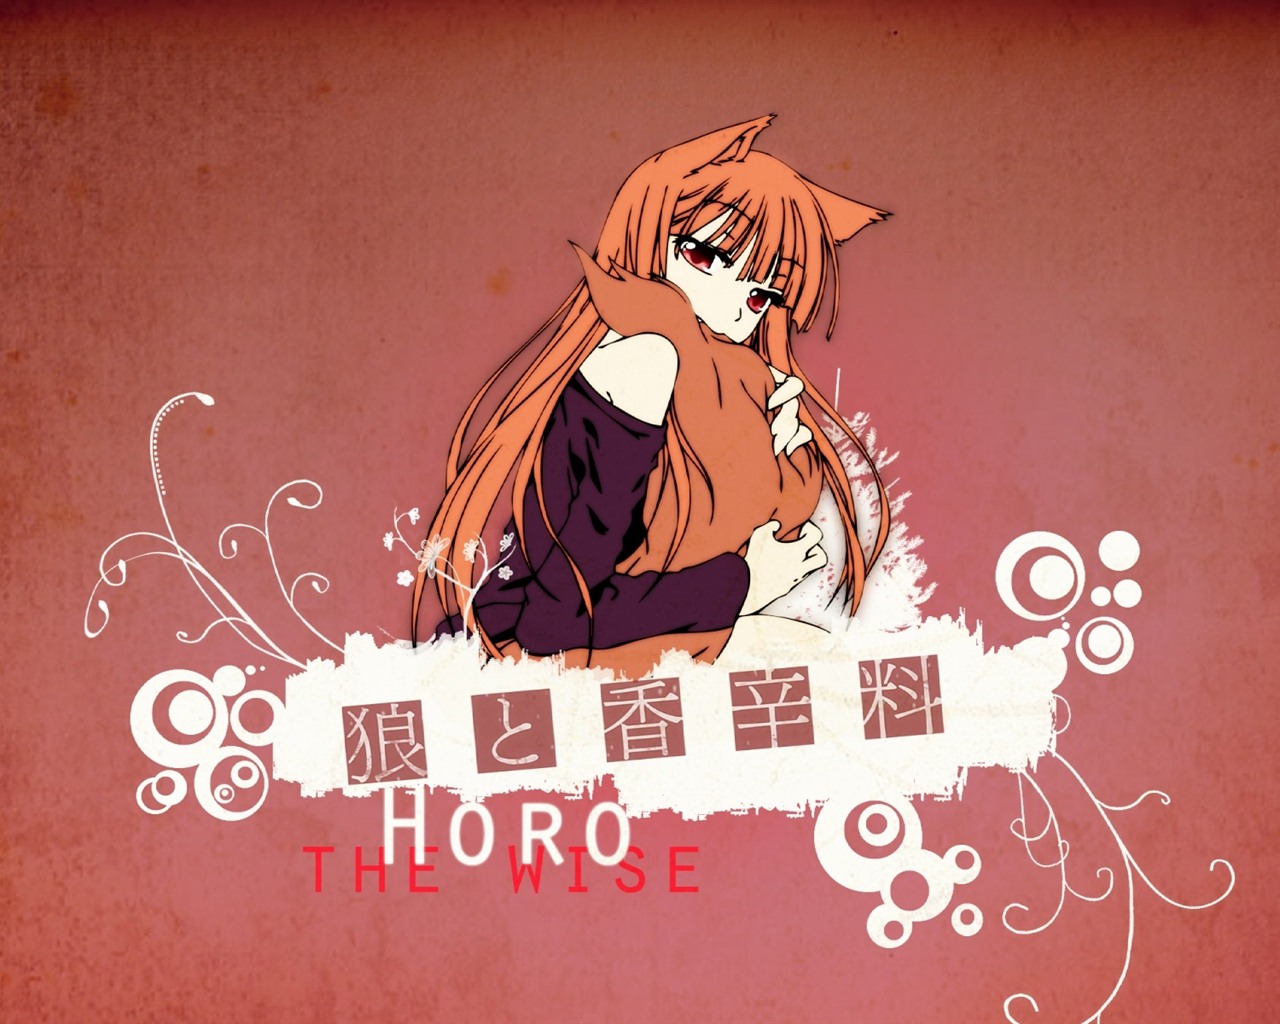 Spice and Wolf HD wallpapers #6 - 1280x1024